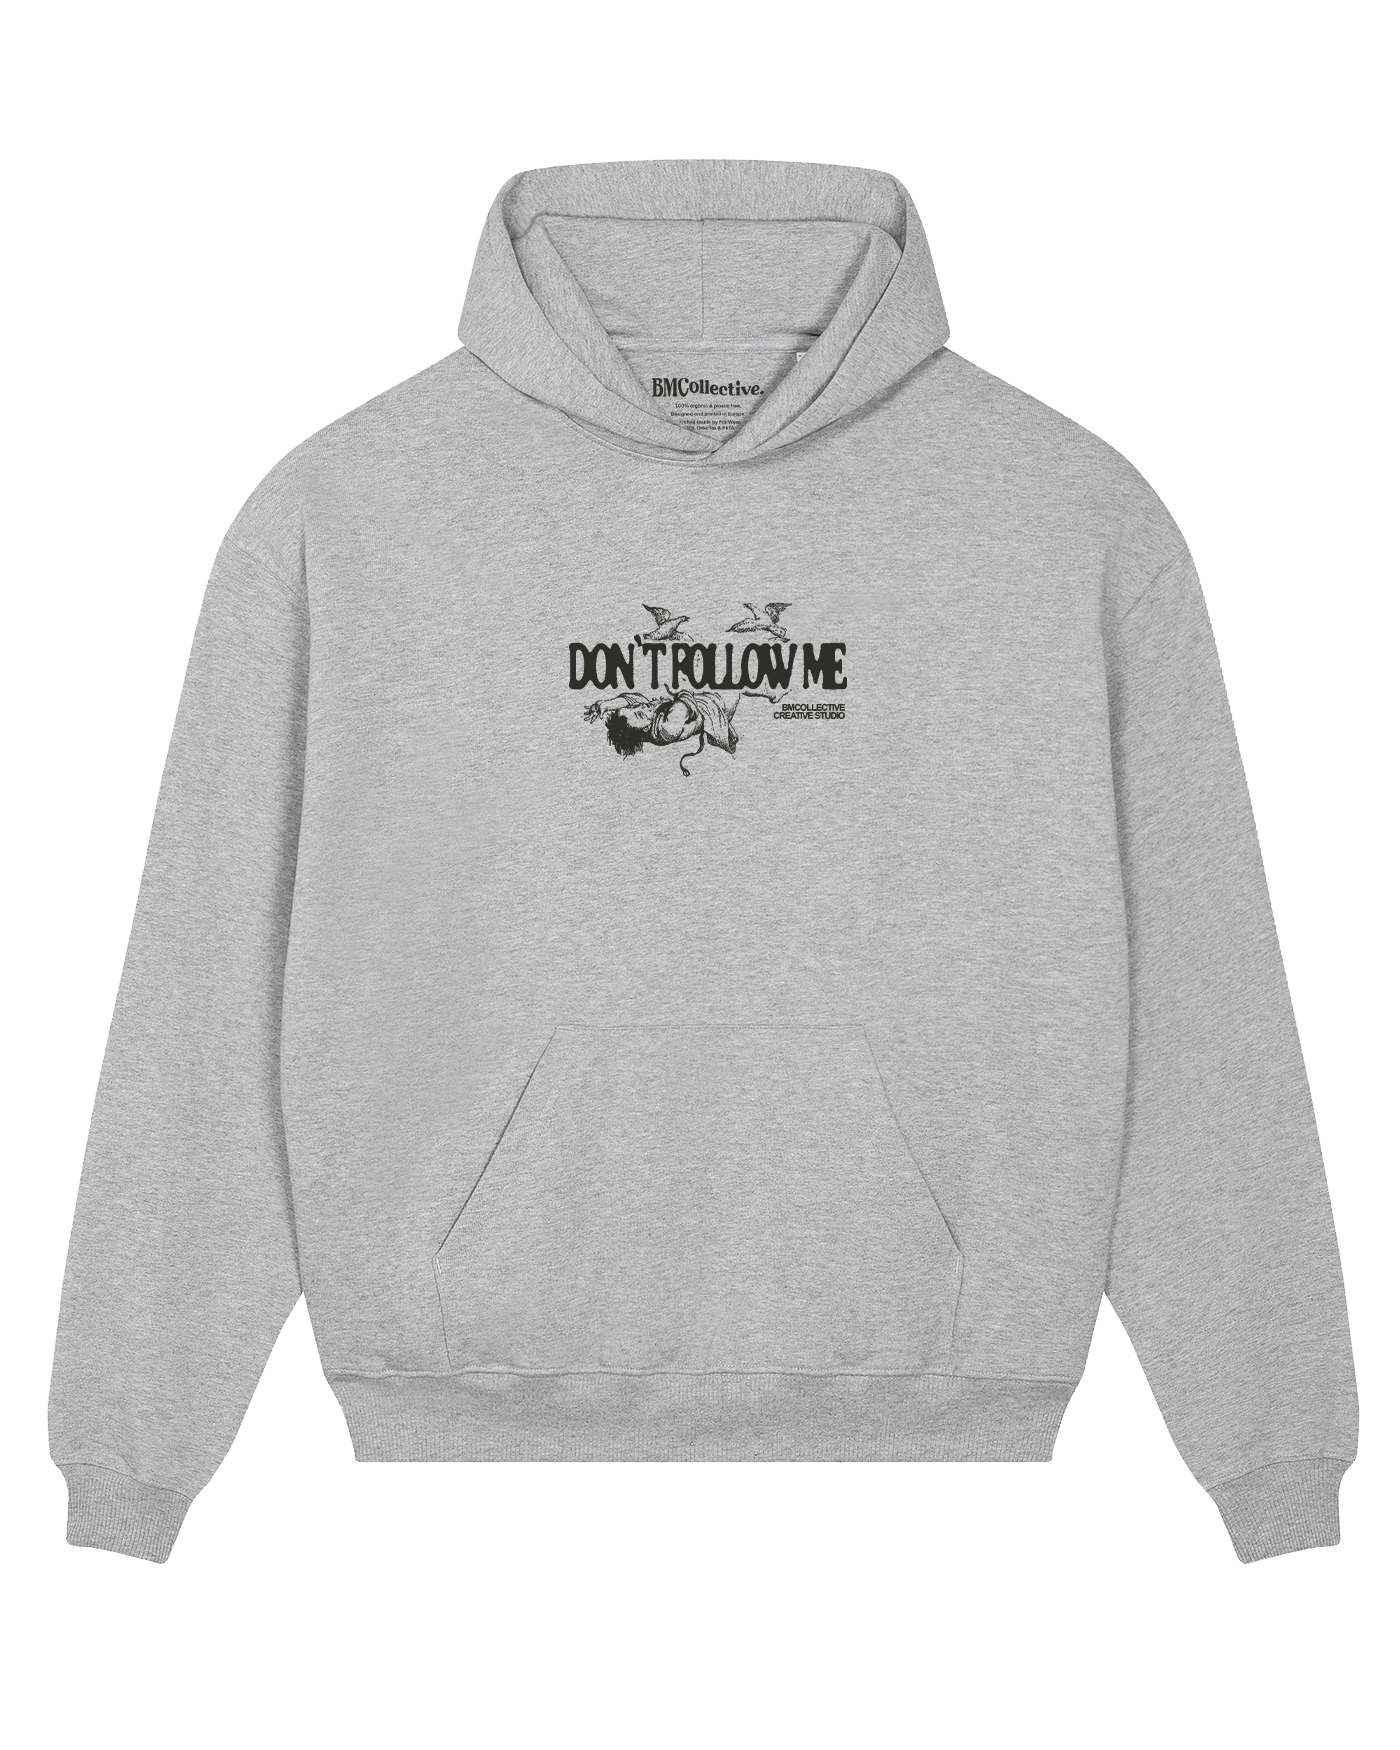 Don't Follow Me Heather Grey Hoodie – BMCollective